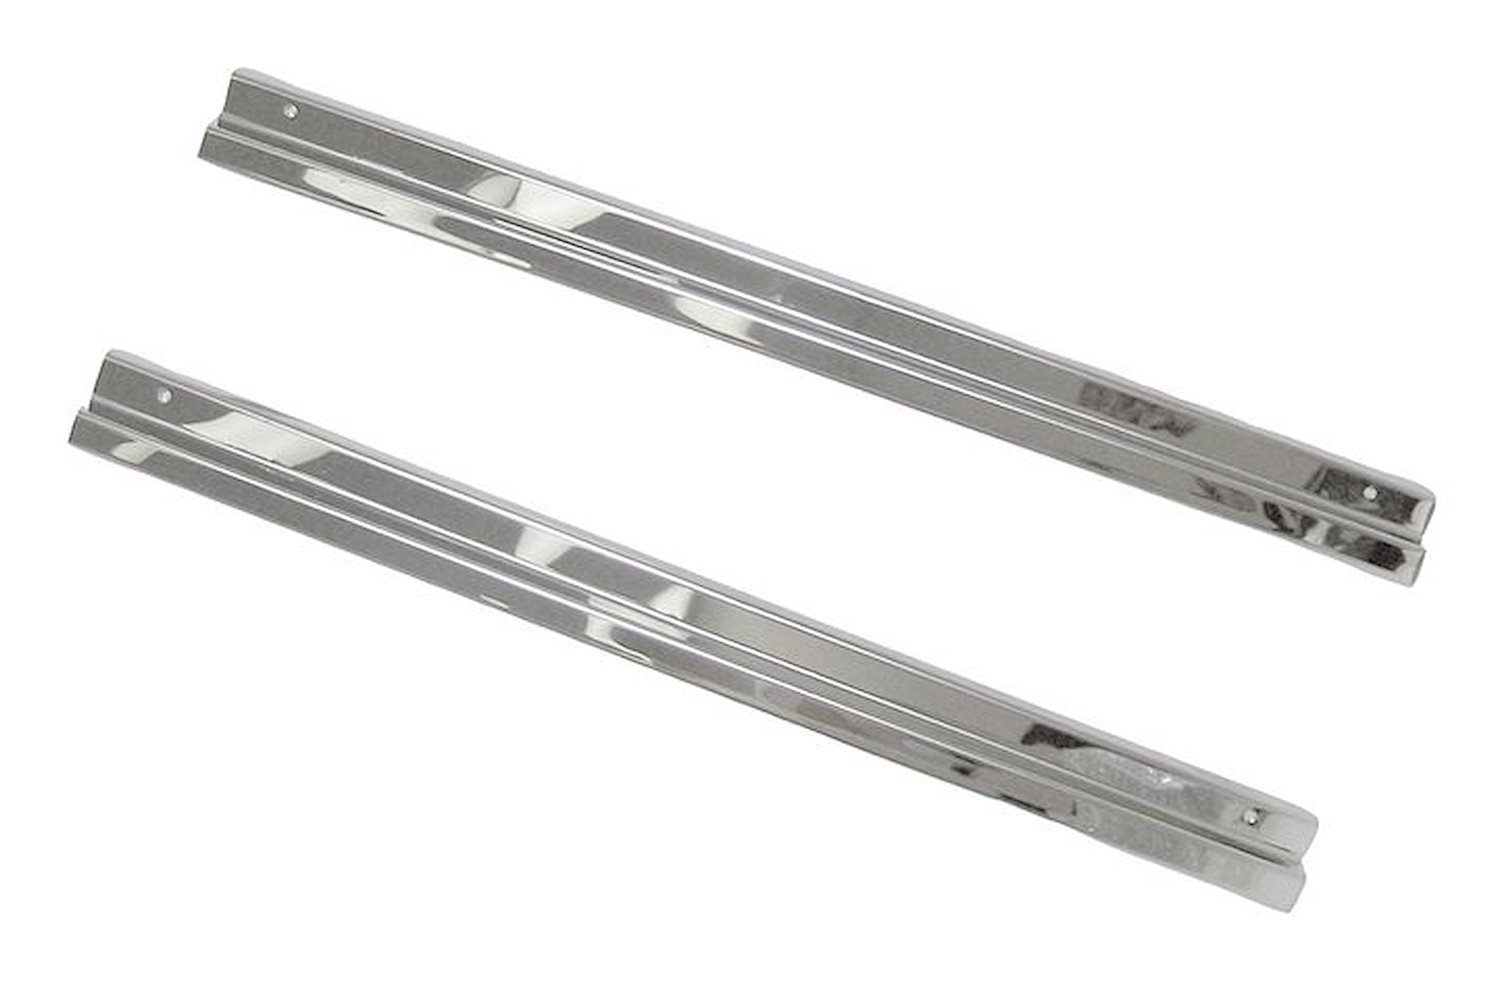 RT34053 Polished Stainless Steel Entry Guard Set for 1997-2002 Jeep TJ Wrangler; Includes 2 Guards